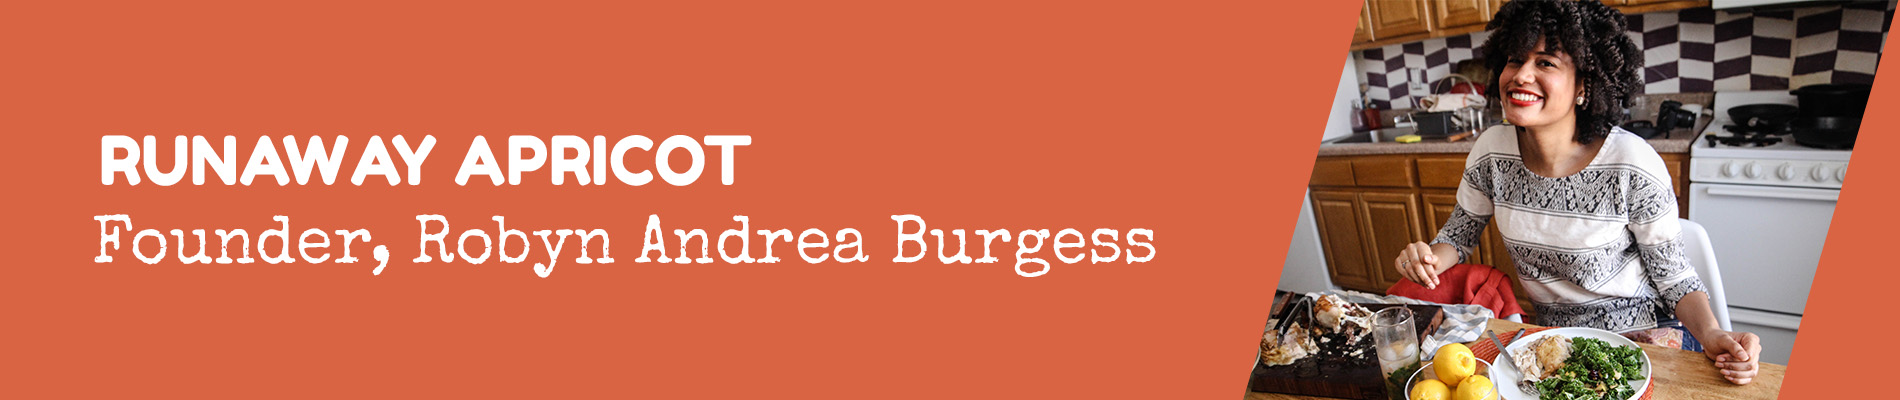 Runaway Apricot Founder Robyn Andrea Burgess